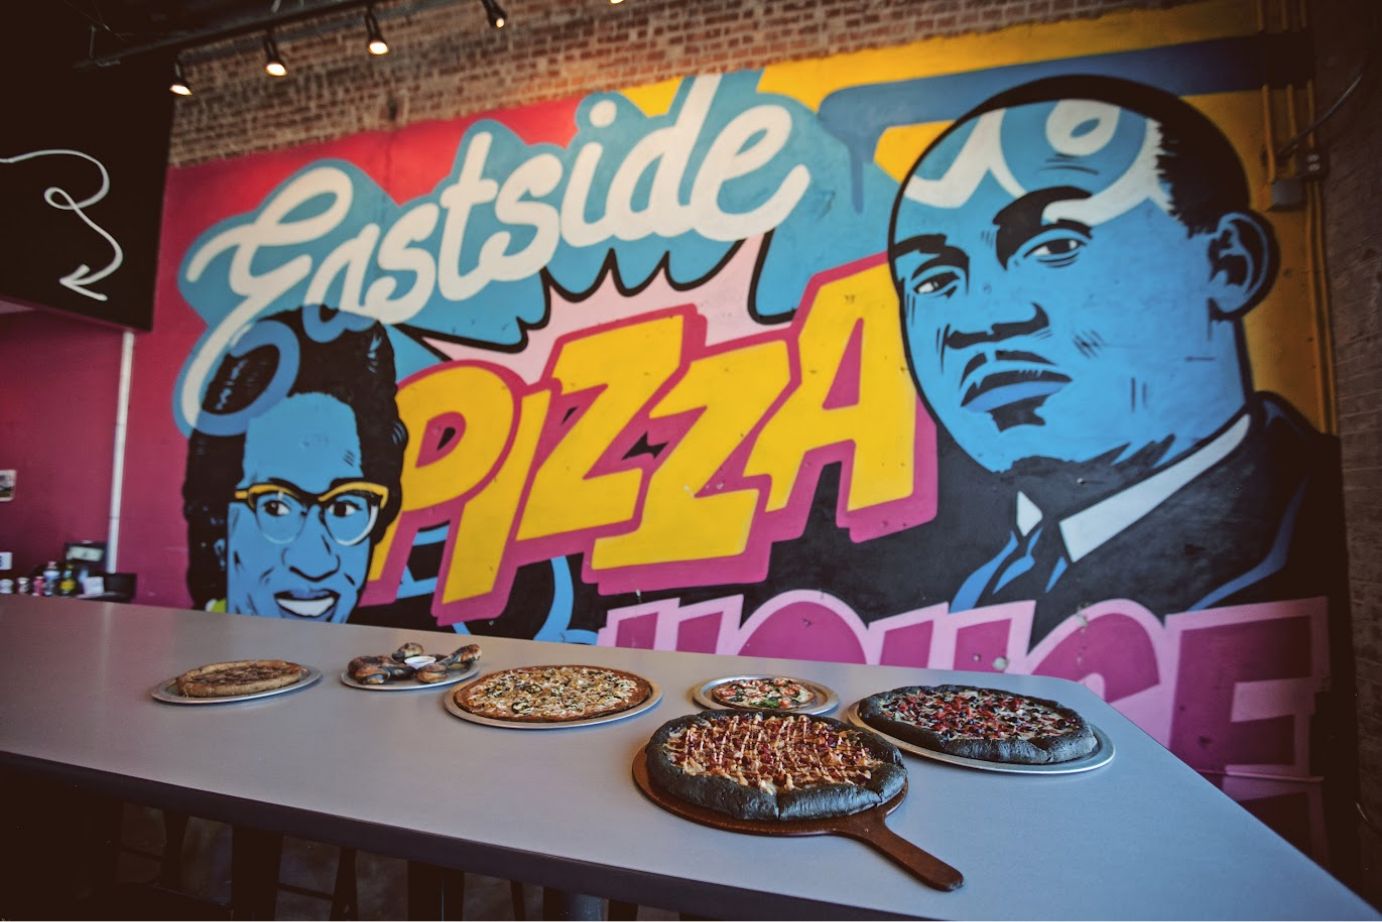 Assorted pizzas on a table, mural art in the background